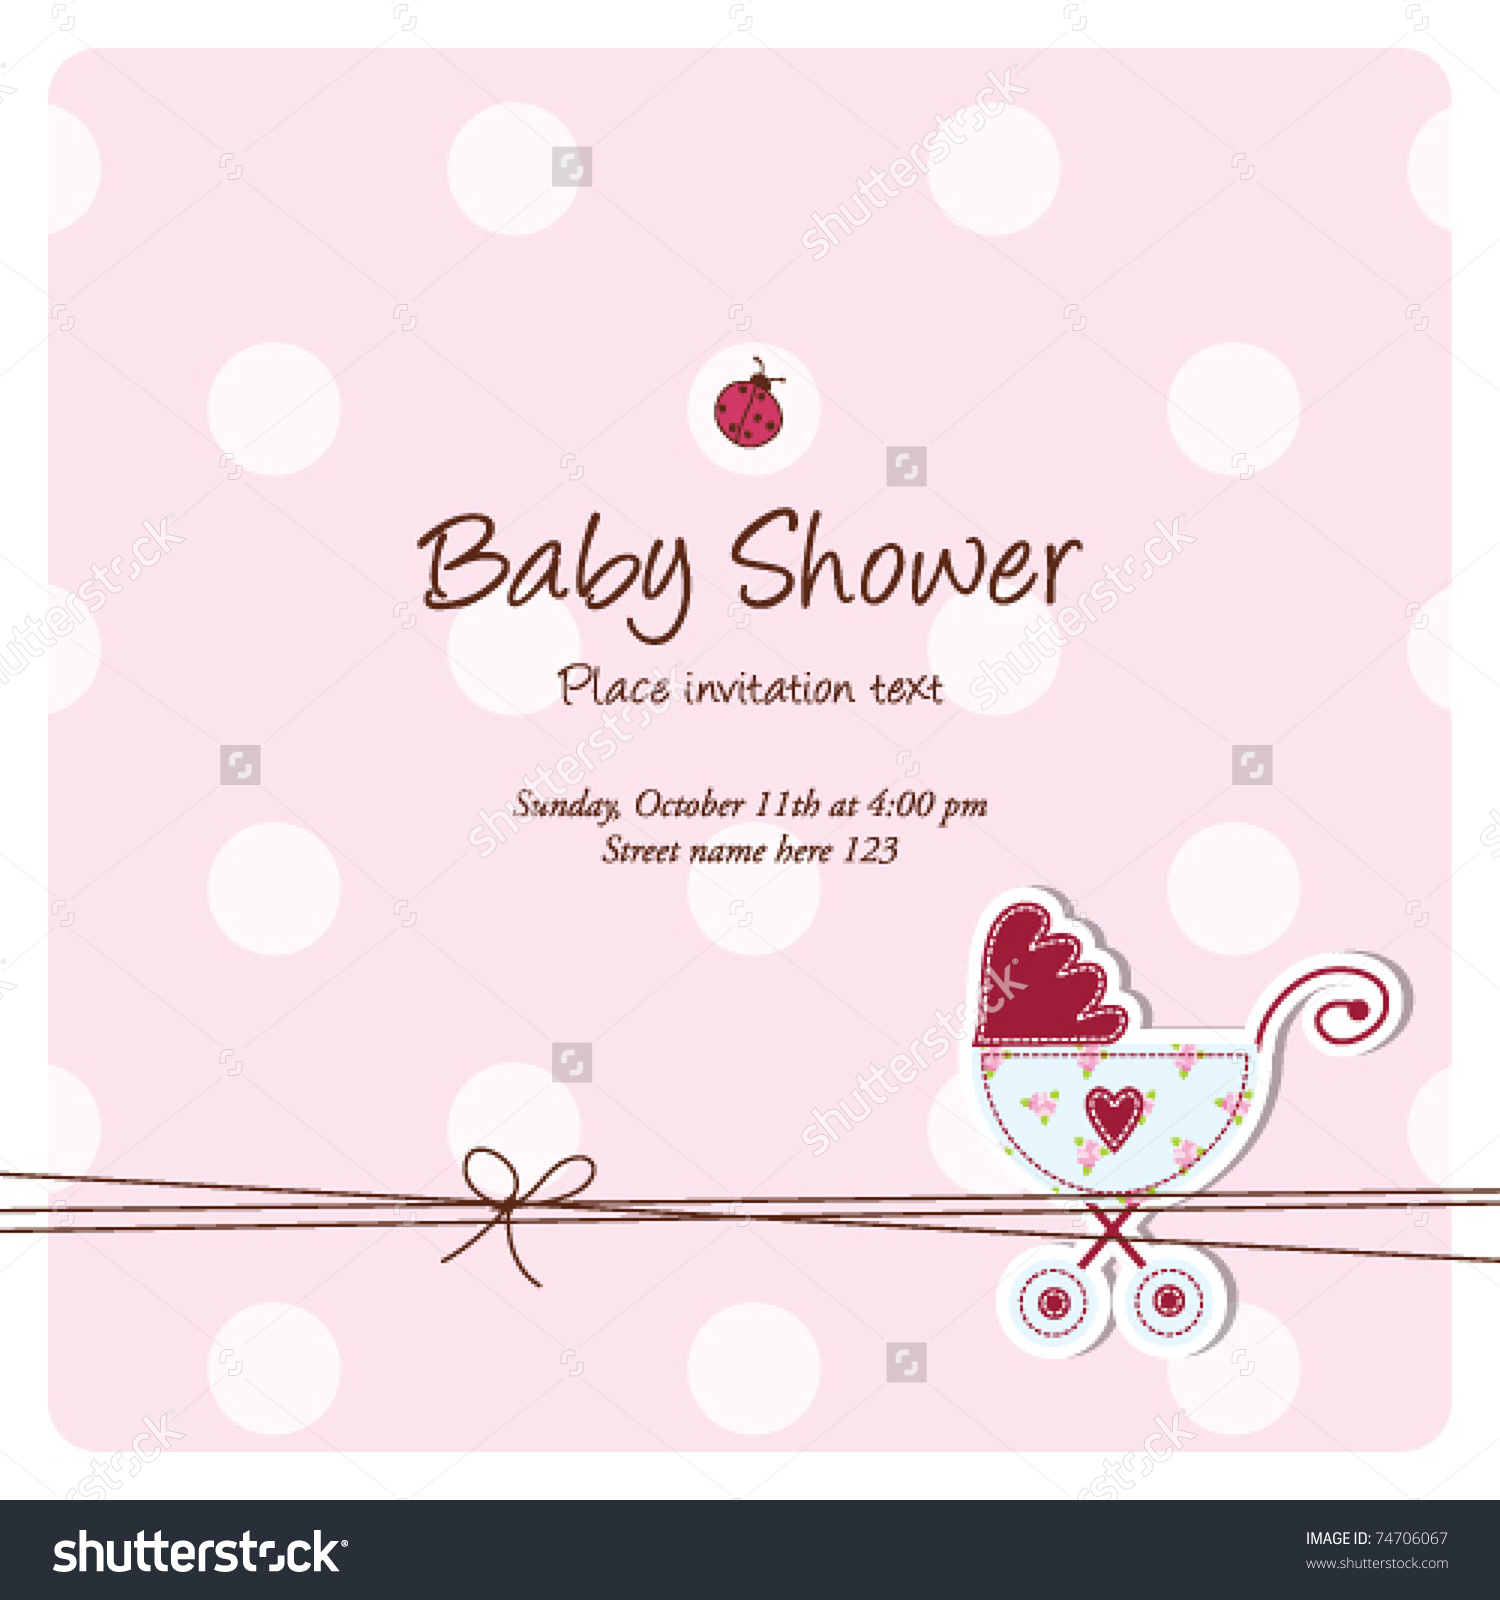 10 Nice Cute Ideas For Baby Shower Invitations card invitation ideas cute babyshower invitation cards unique shower 2024